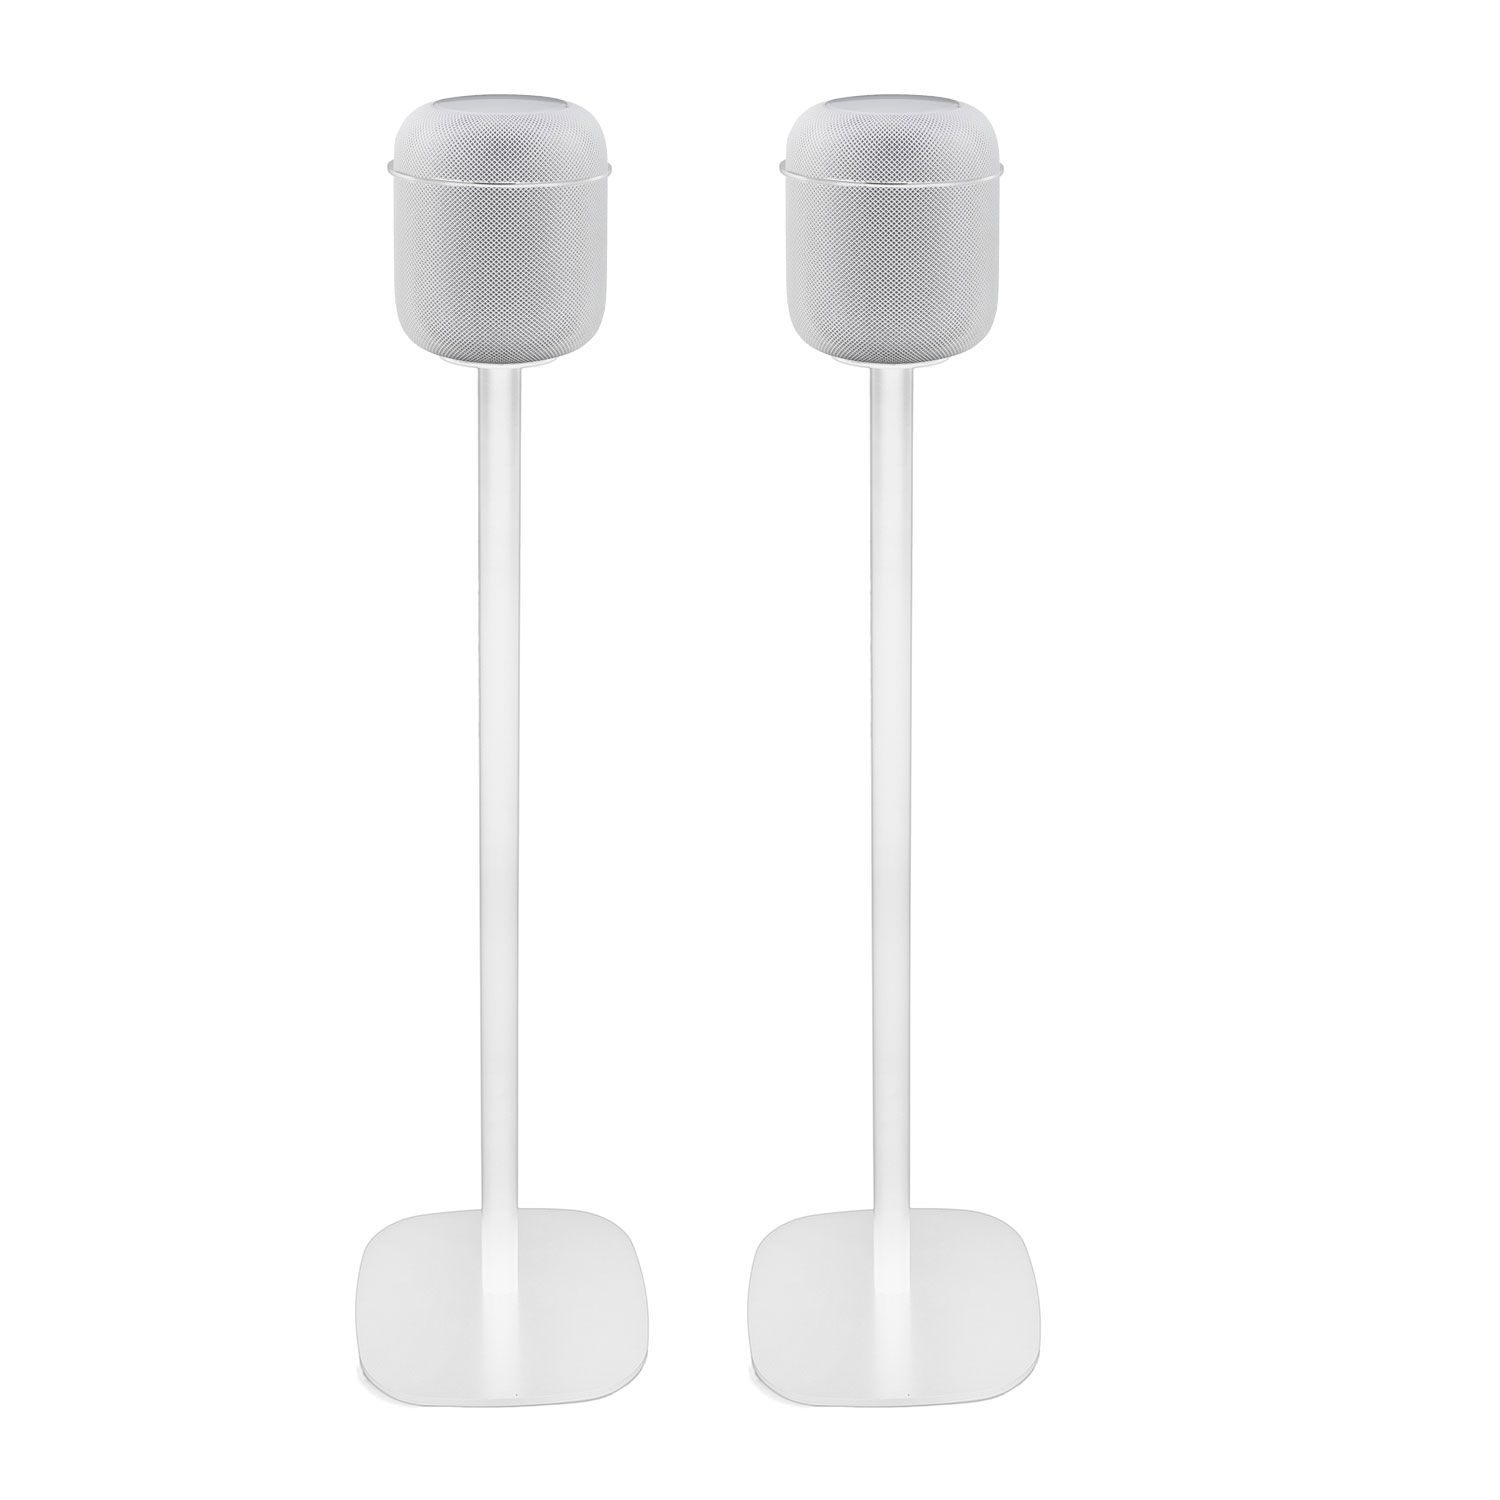 Vebos floor stand Apple Homepod white set | The floor stand for